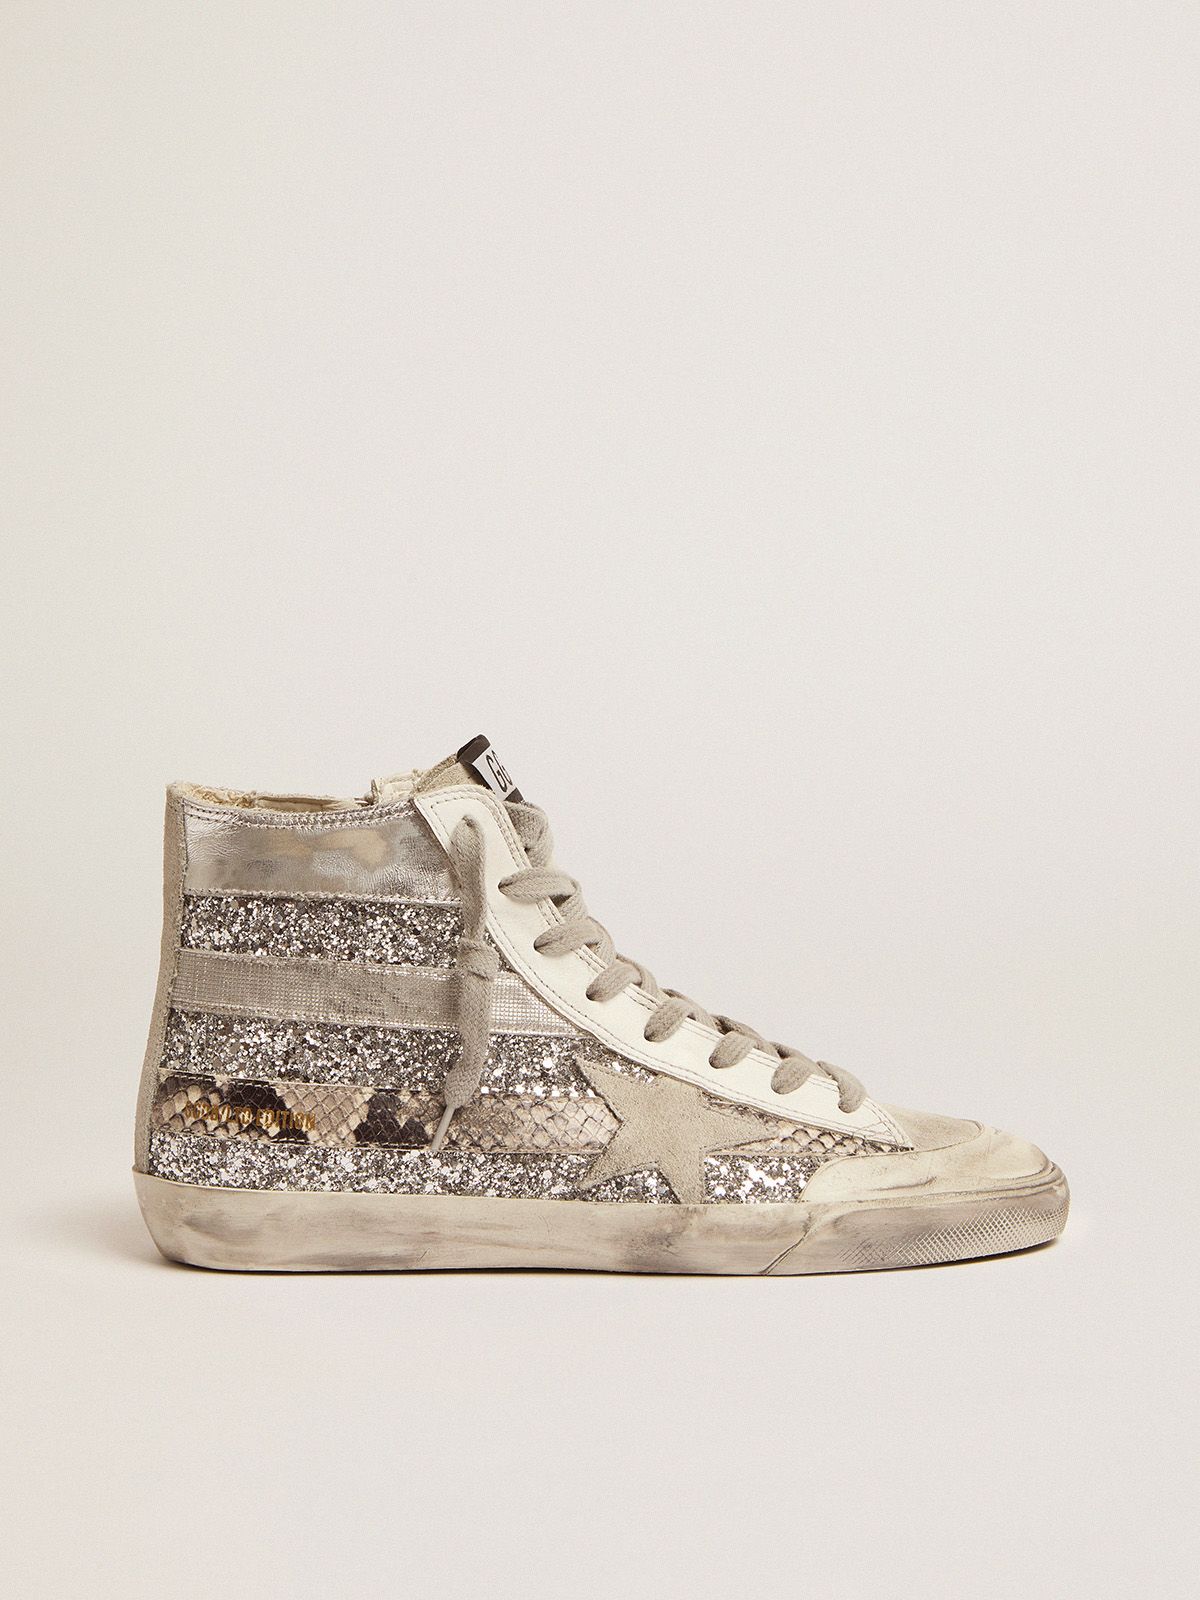 Francy Penstar LAB sneakers with glitter upper and silver and snake-print stripes